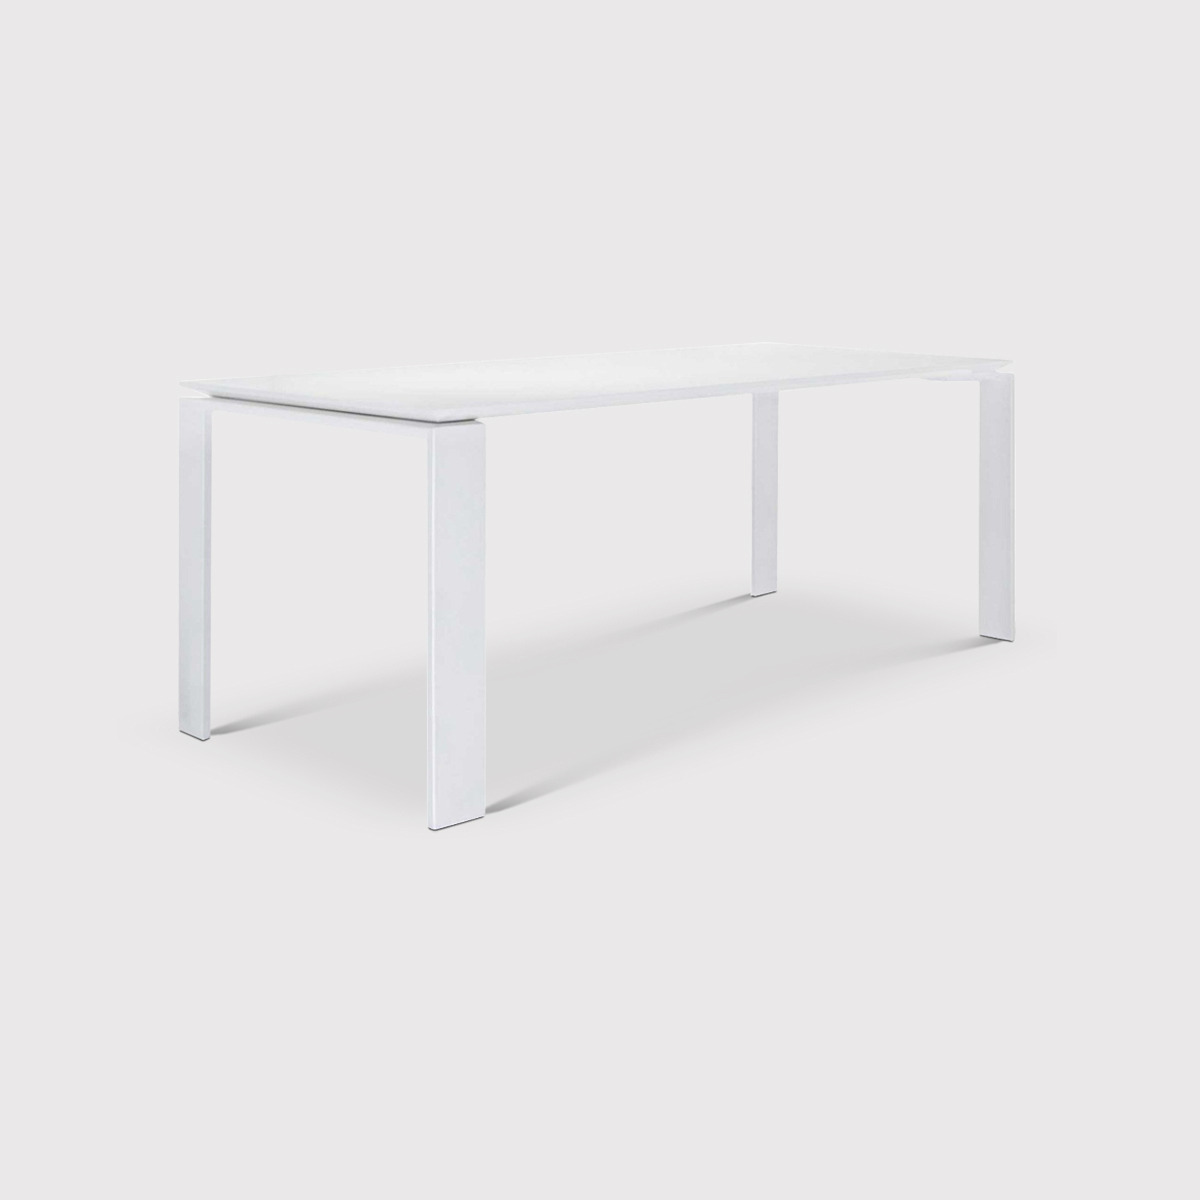 Kartell Four Outdoor Dining Table 223X79, White Metal - W223cm - Barker & Stonehouse - image 1